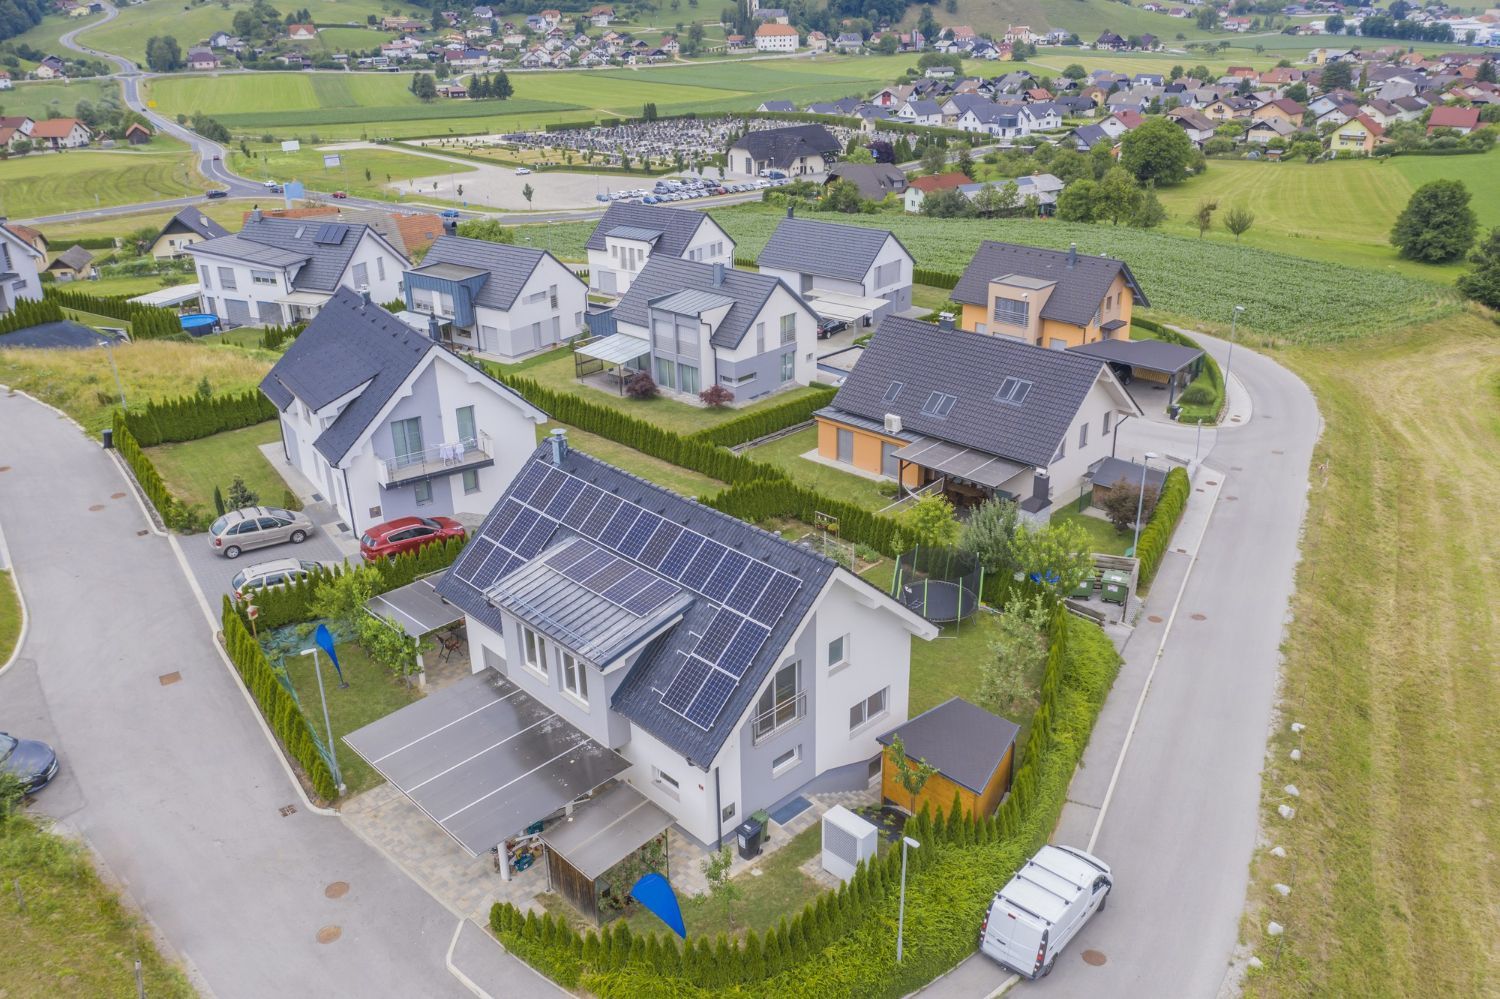 An aerial view of a residential area with houses and solar panels on the roofs.